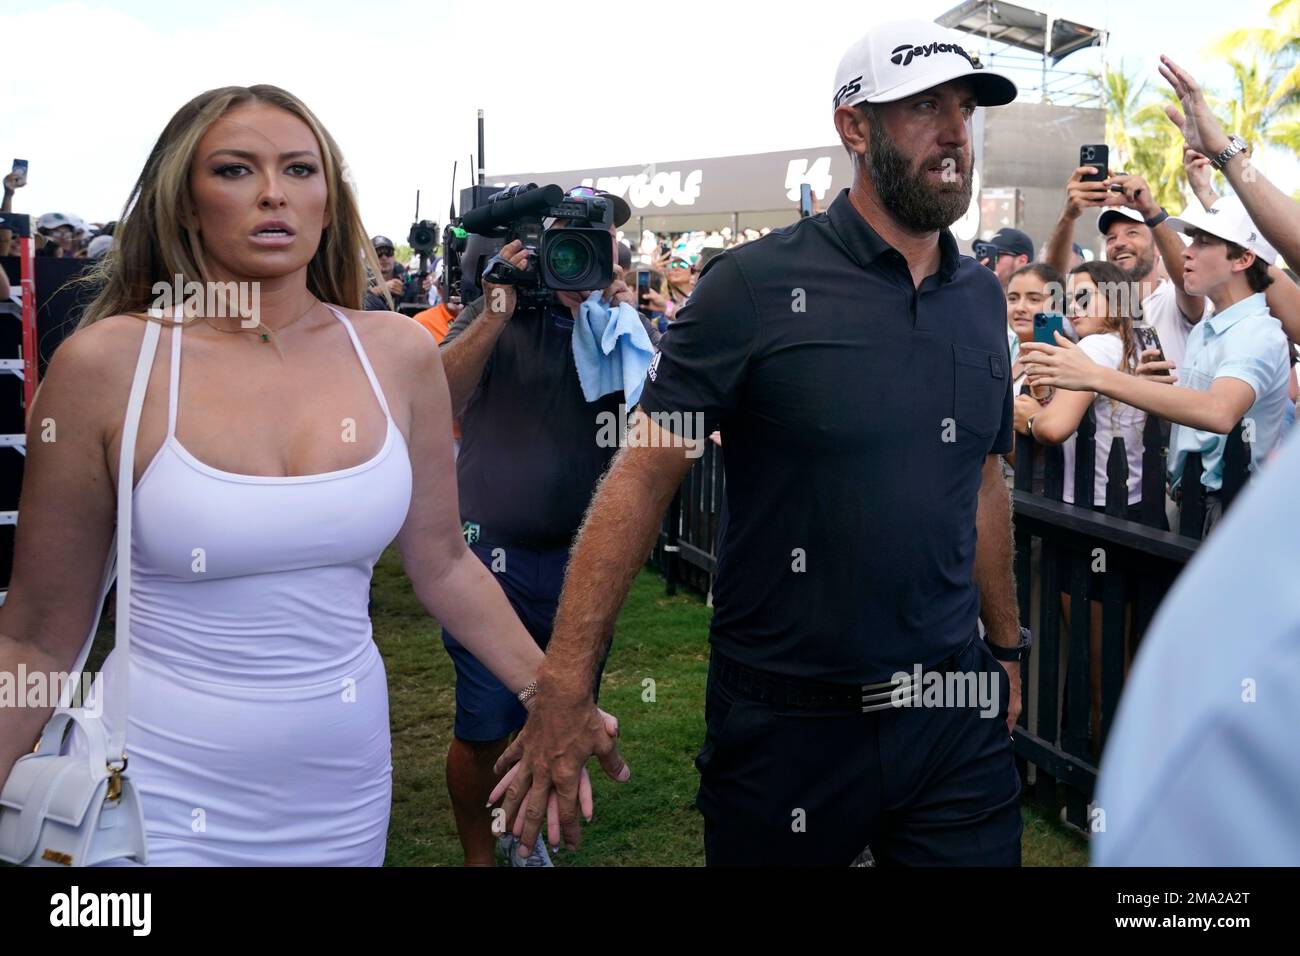 Who is Dustin Johnson's wife?